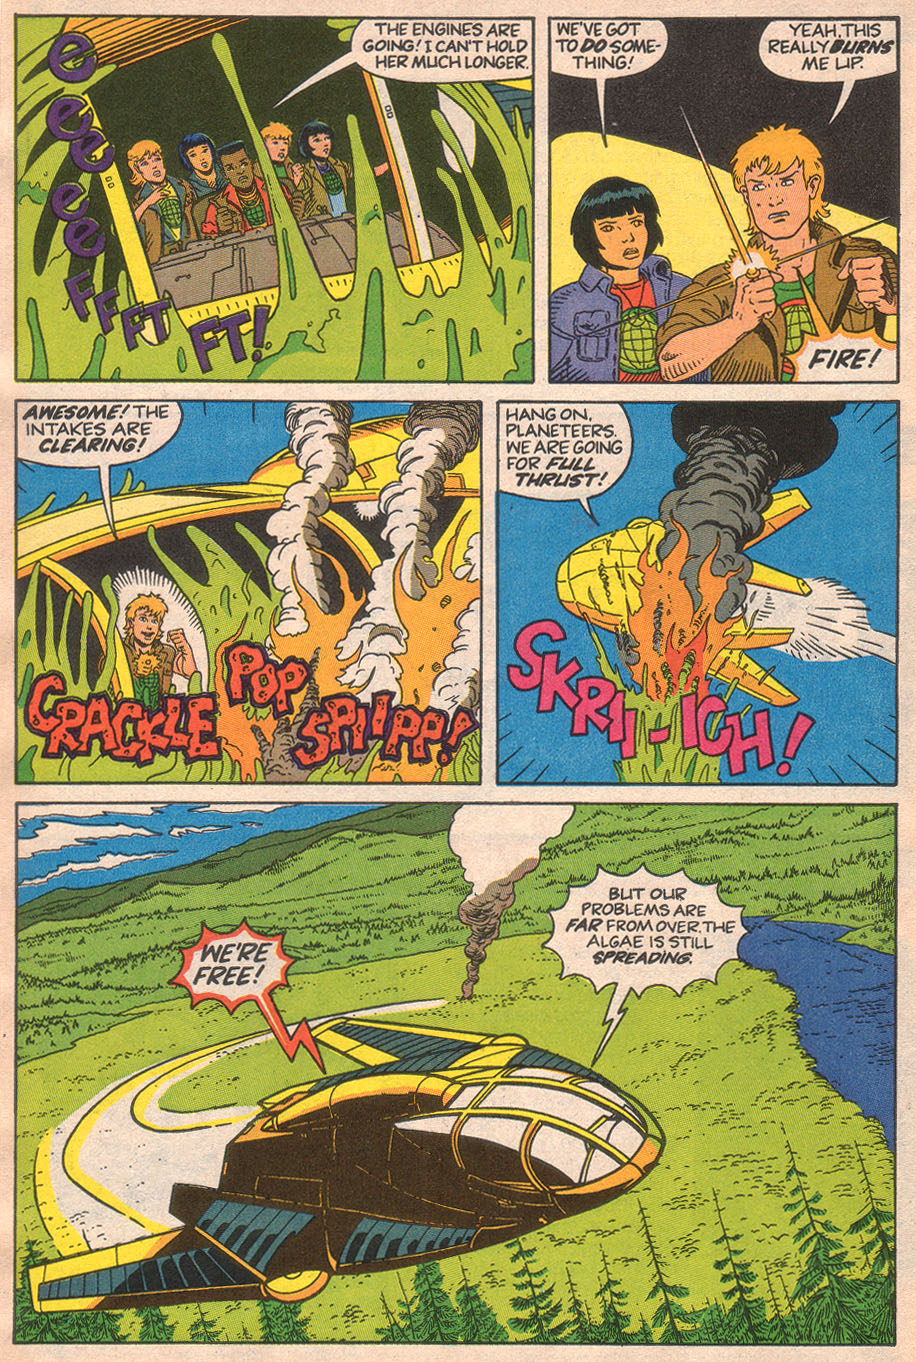 Captain Planet and the Planeteers 6 Page 13